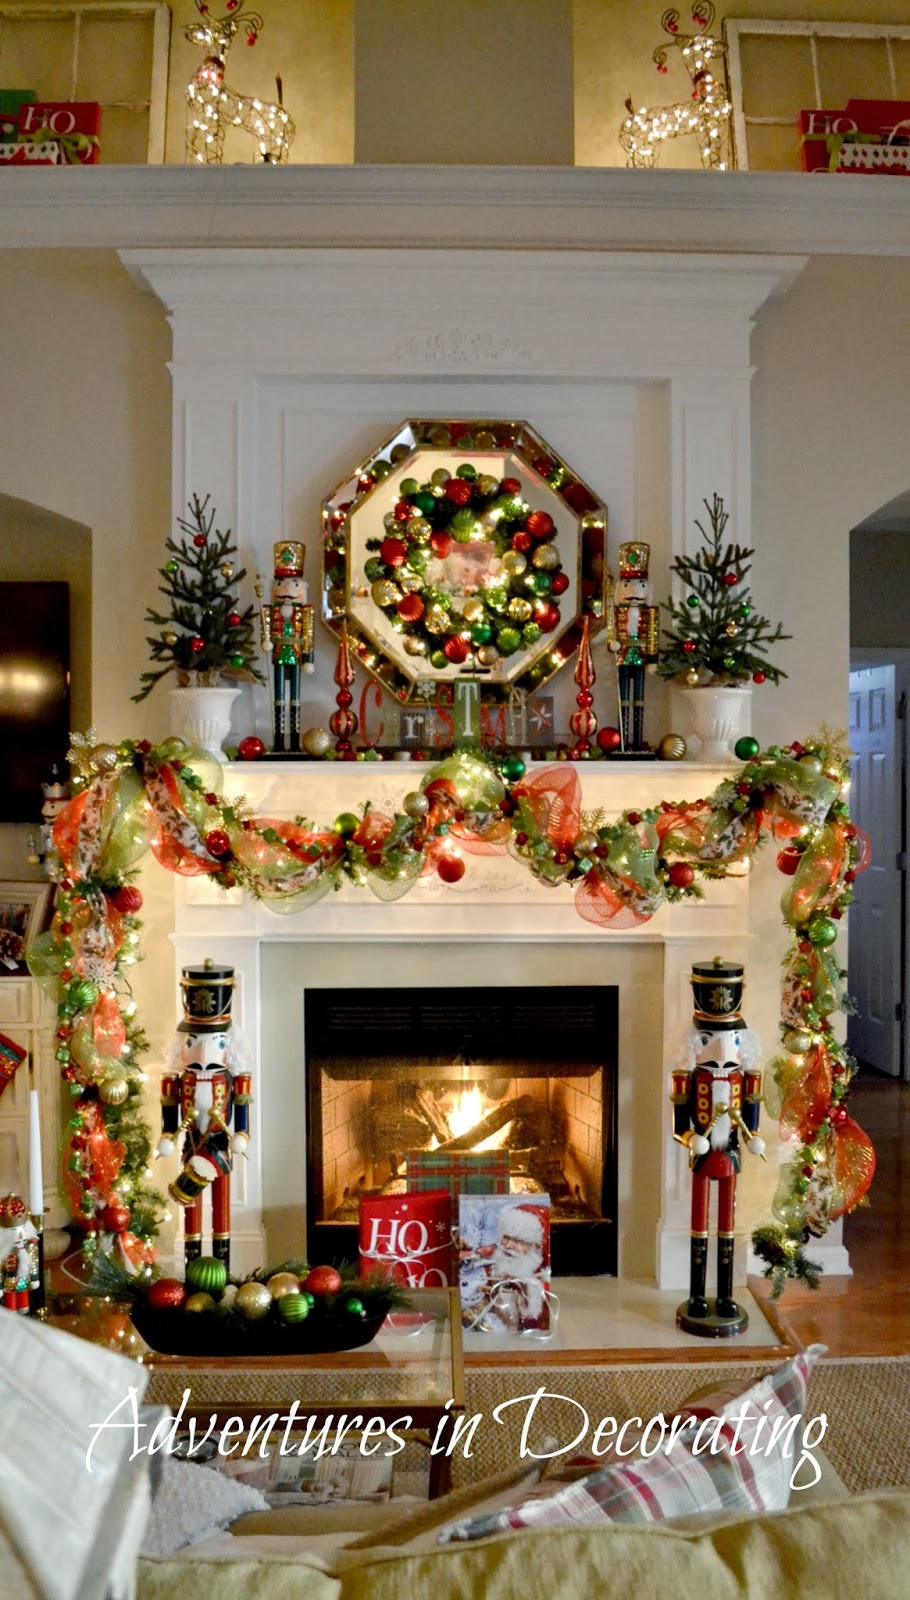 Fireplace Decorations For Christmas
 Adventures in Decorating Our Christmas Mantel and "Deck